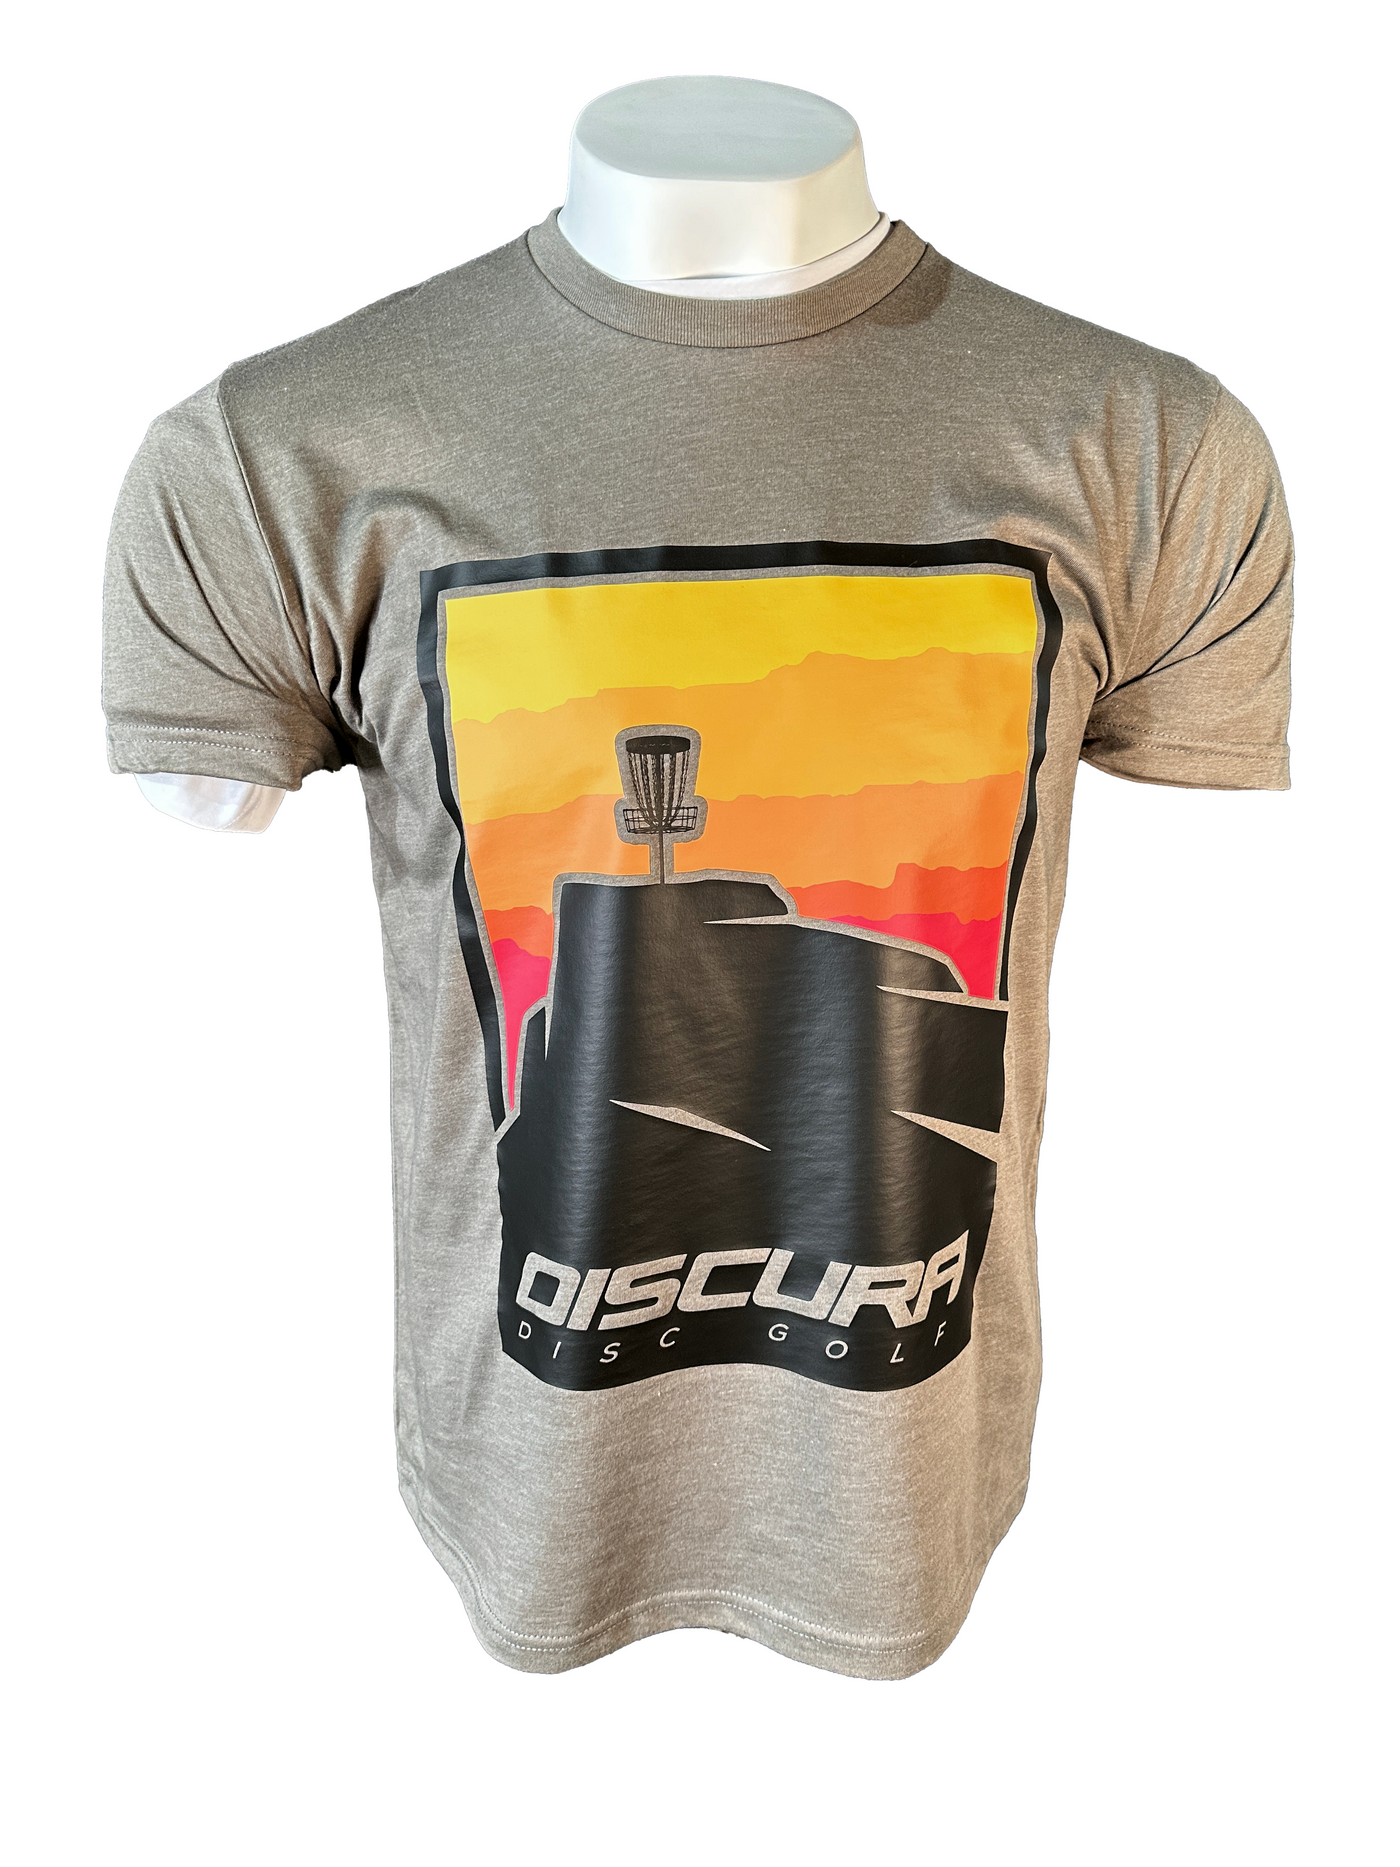 Discura Ascent Lifestyle Tee